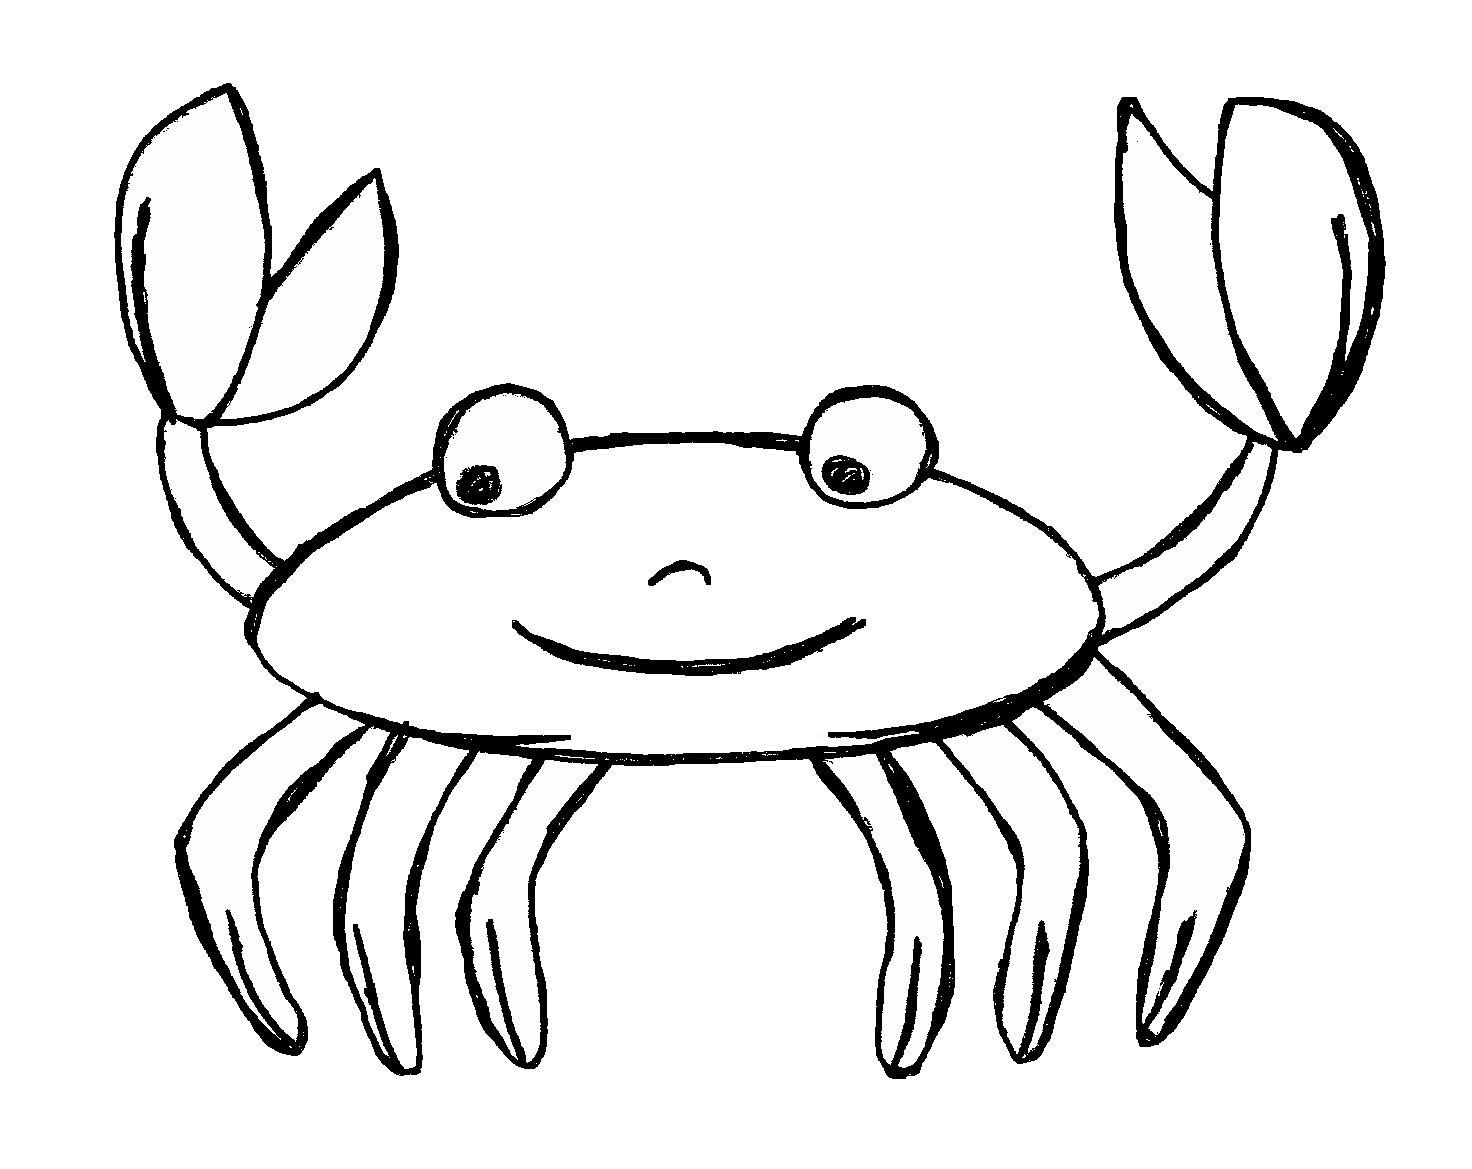 Crab clip art black and white free clipart